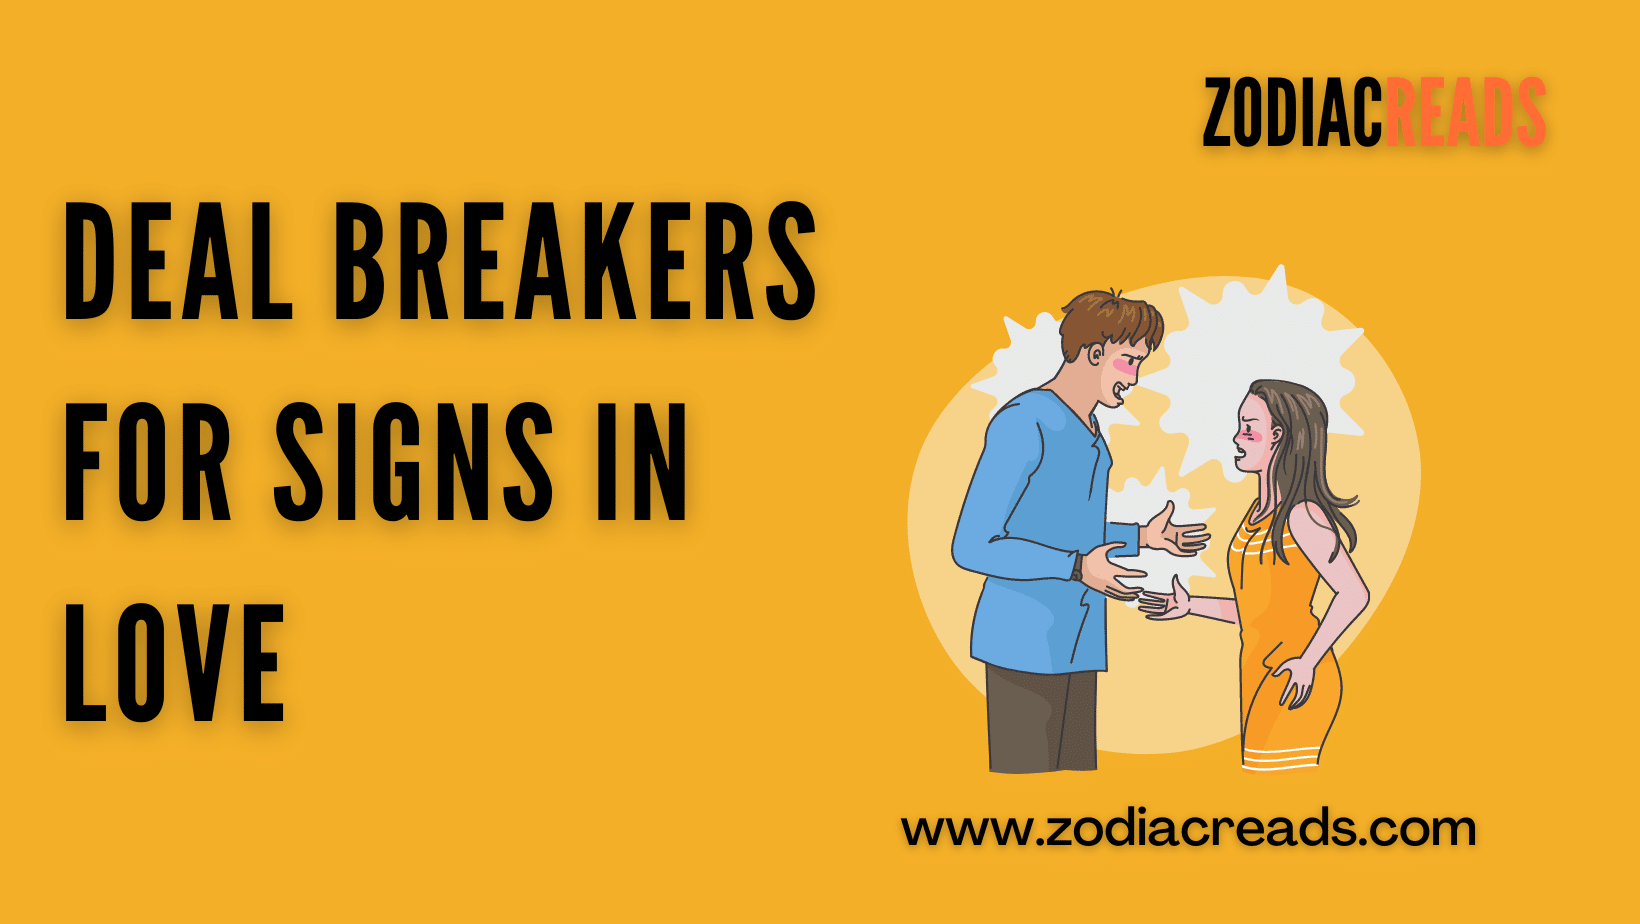 Deal breakers based on your zodiac sign